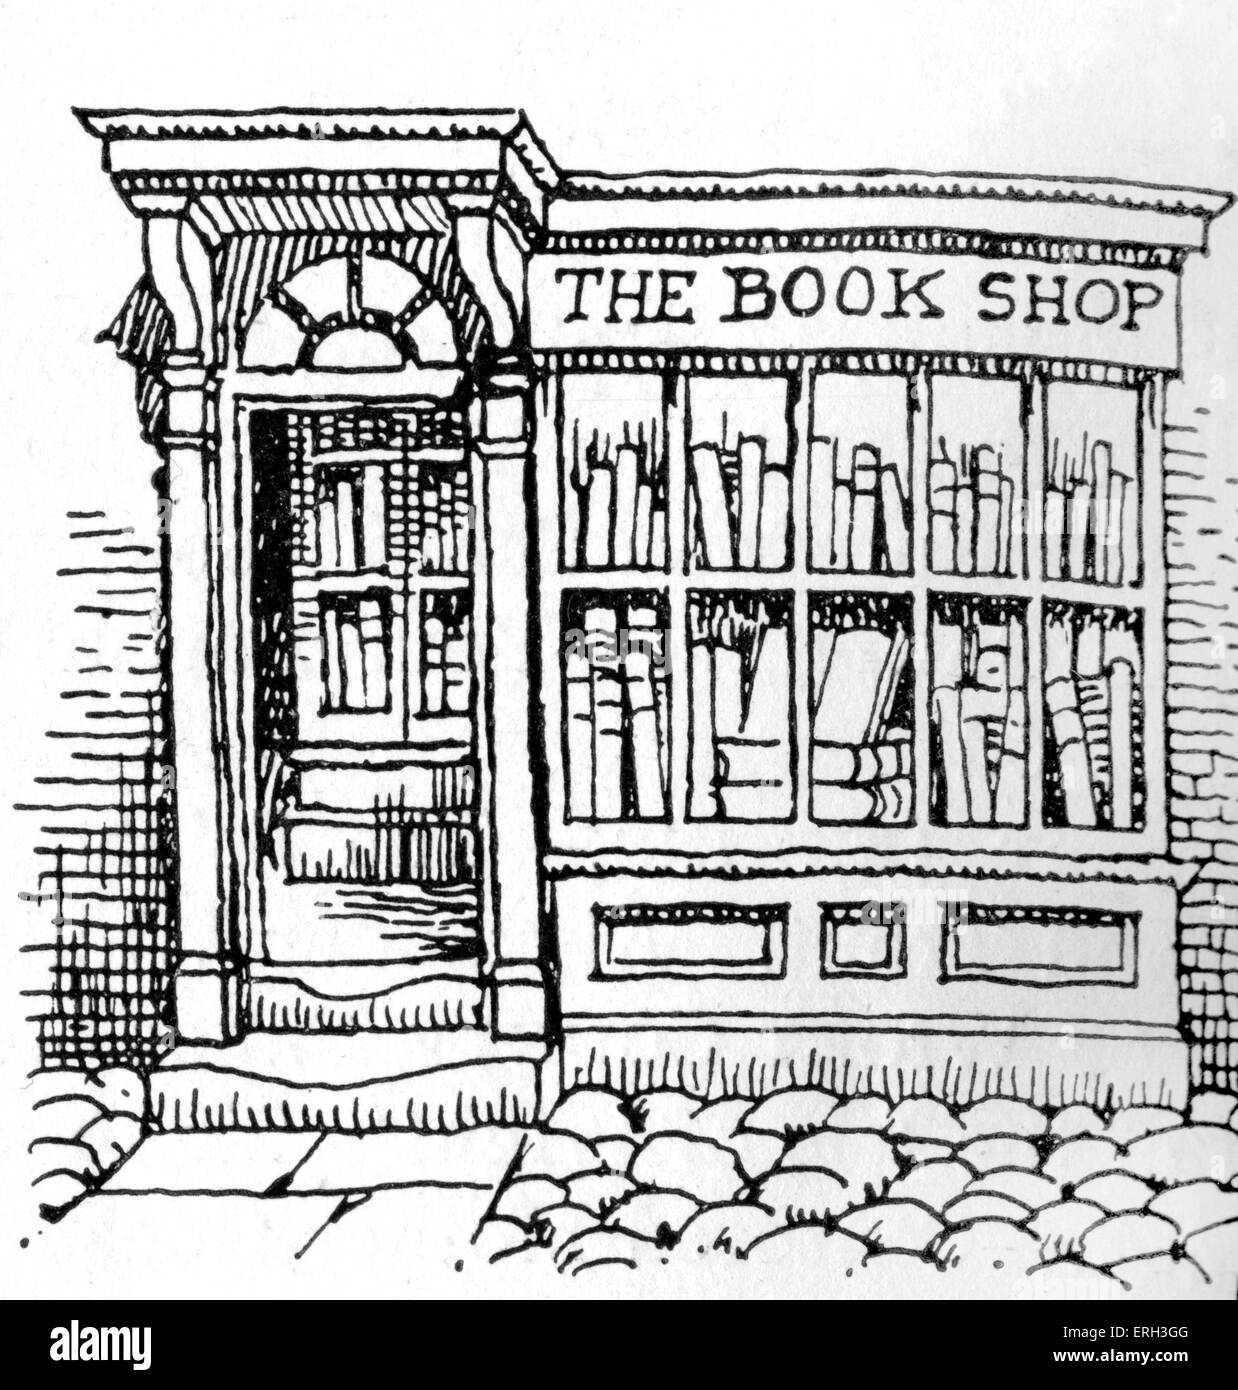 'The Book Shop' - drawing of a bookshop front (olde world style) Stock Photo